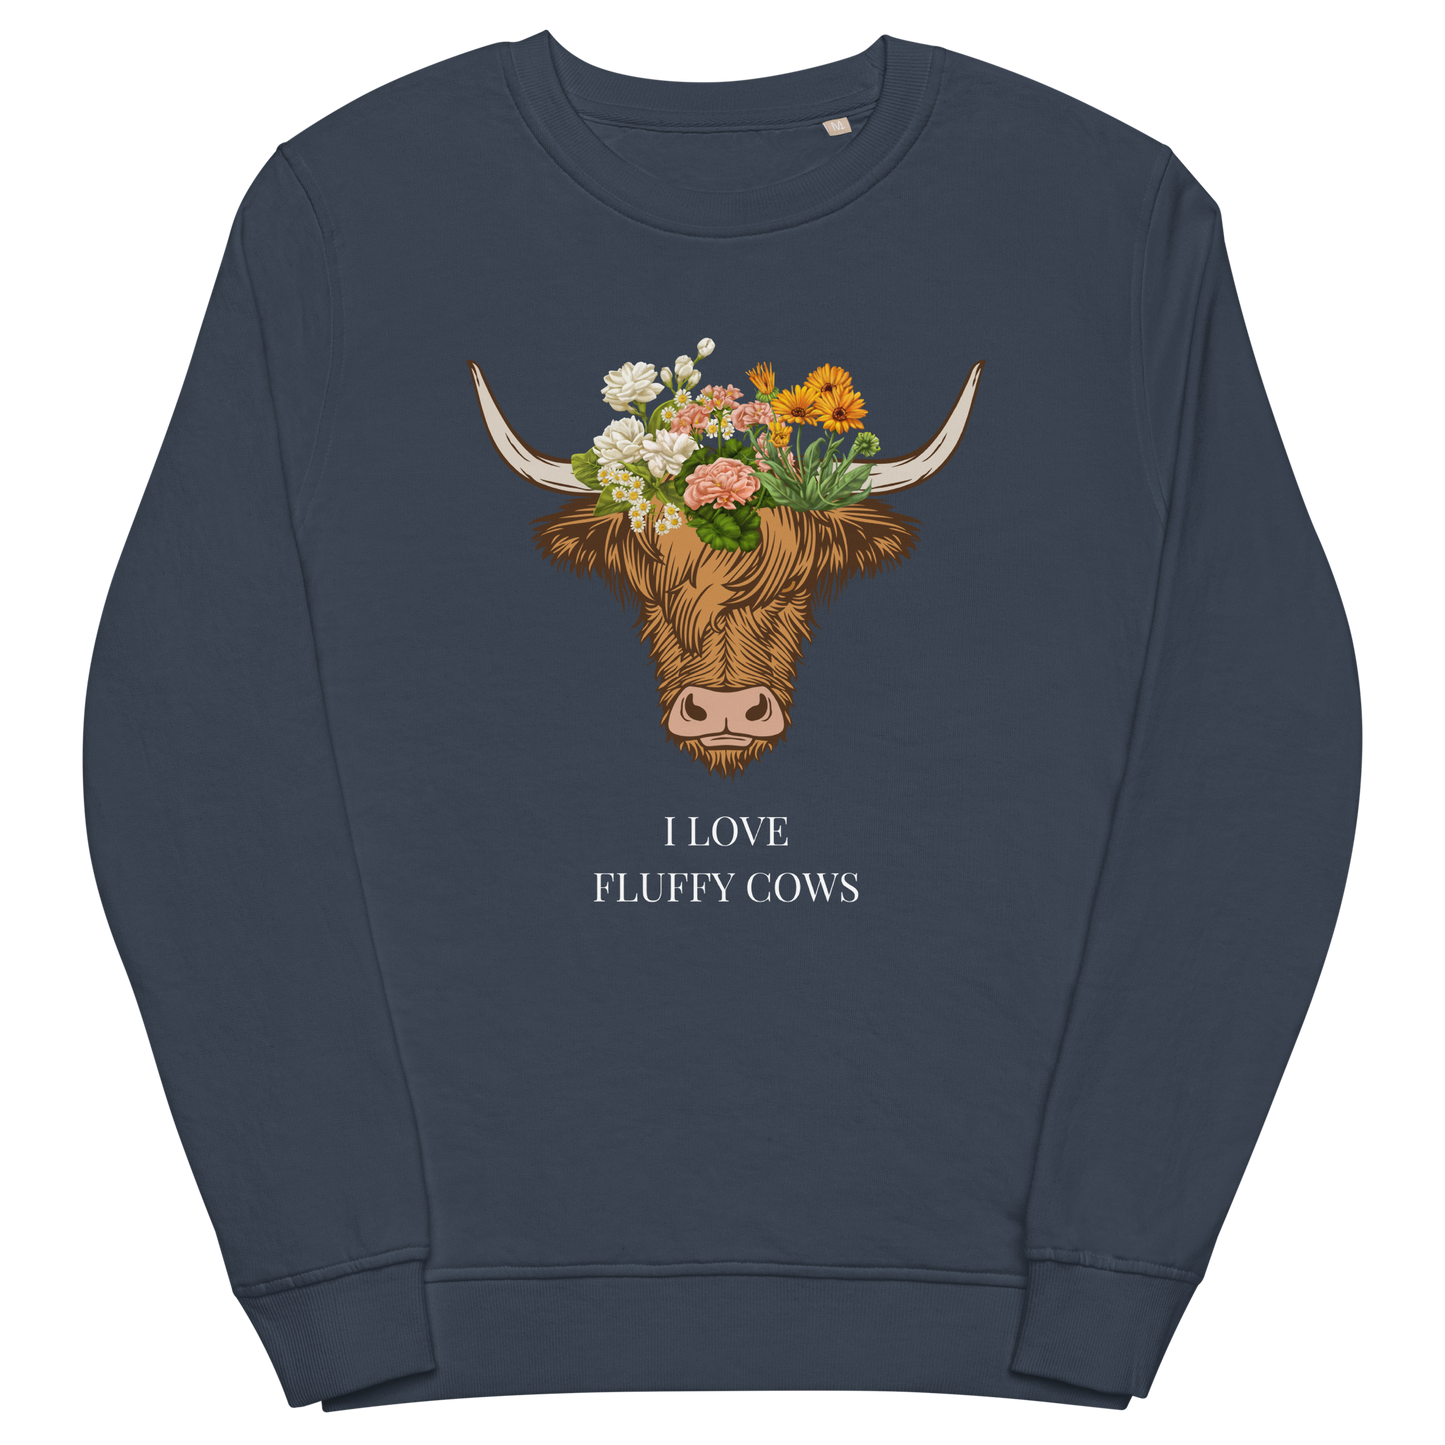 French Navy Organic Cotton Highland Cow Sweatshirt featuring an adorable I Love Fluffy Cows graphic on the chest - Cute Graphic Highland Cow Sweatshirts - Boozy Fox